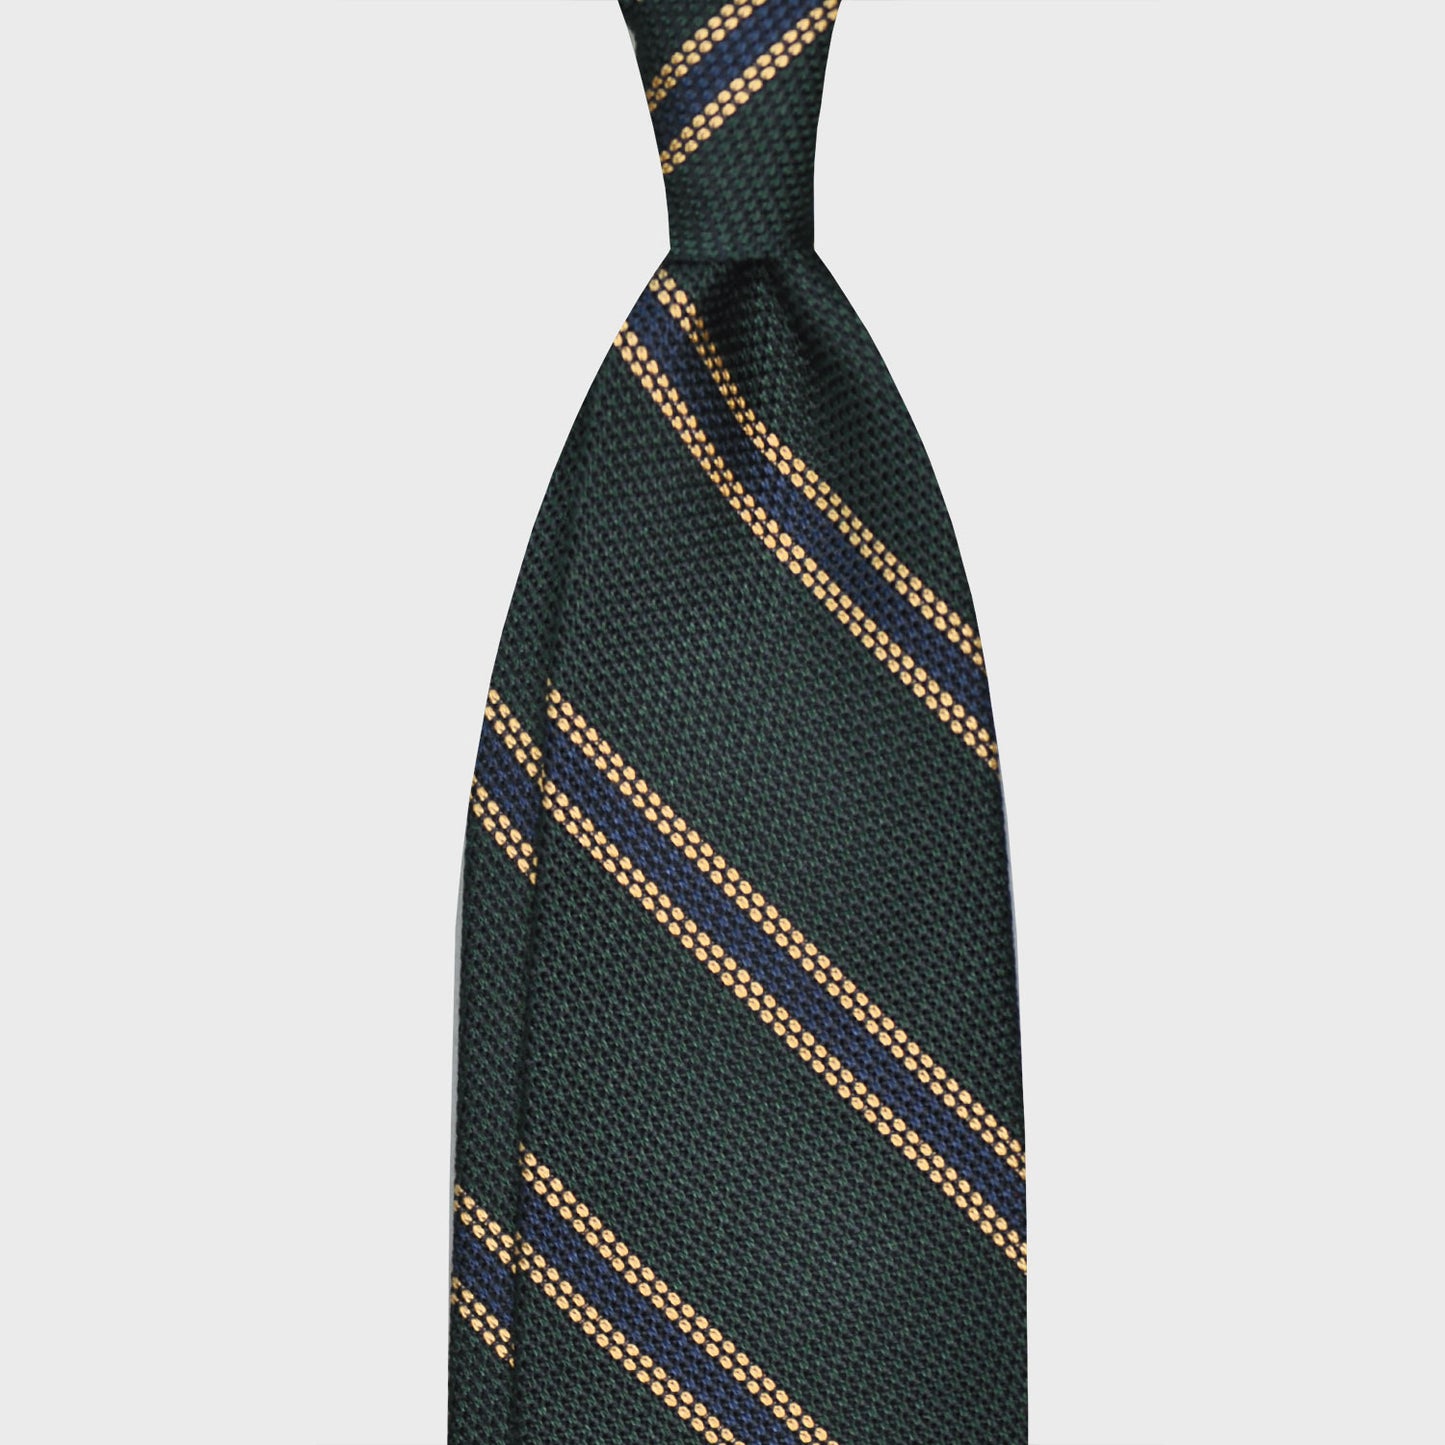 Emerald Green Striped Grenadine Silk Tie Garza Handmade in Italy. Classic regimental silk tie, F.Marino Napoli exclusive for Wools Boutique Uomo, hand rolled edge, unlined 3 folds, handmade with refined grenadine silk, emerald green background with cobalt blue and yellow gold colors striped.